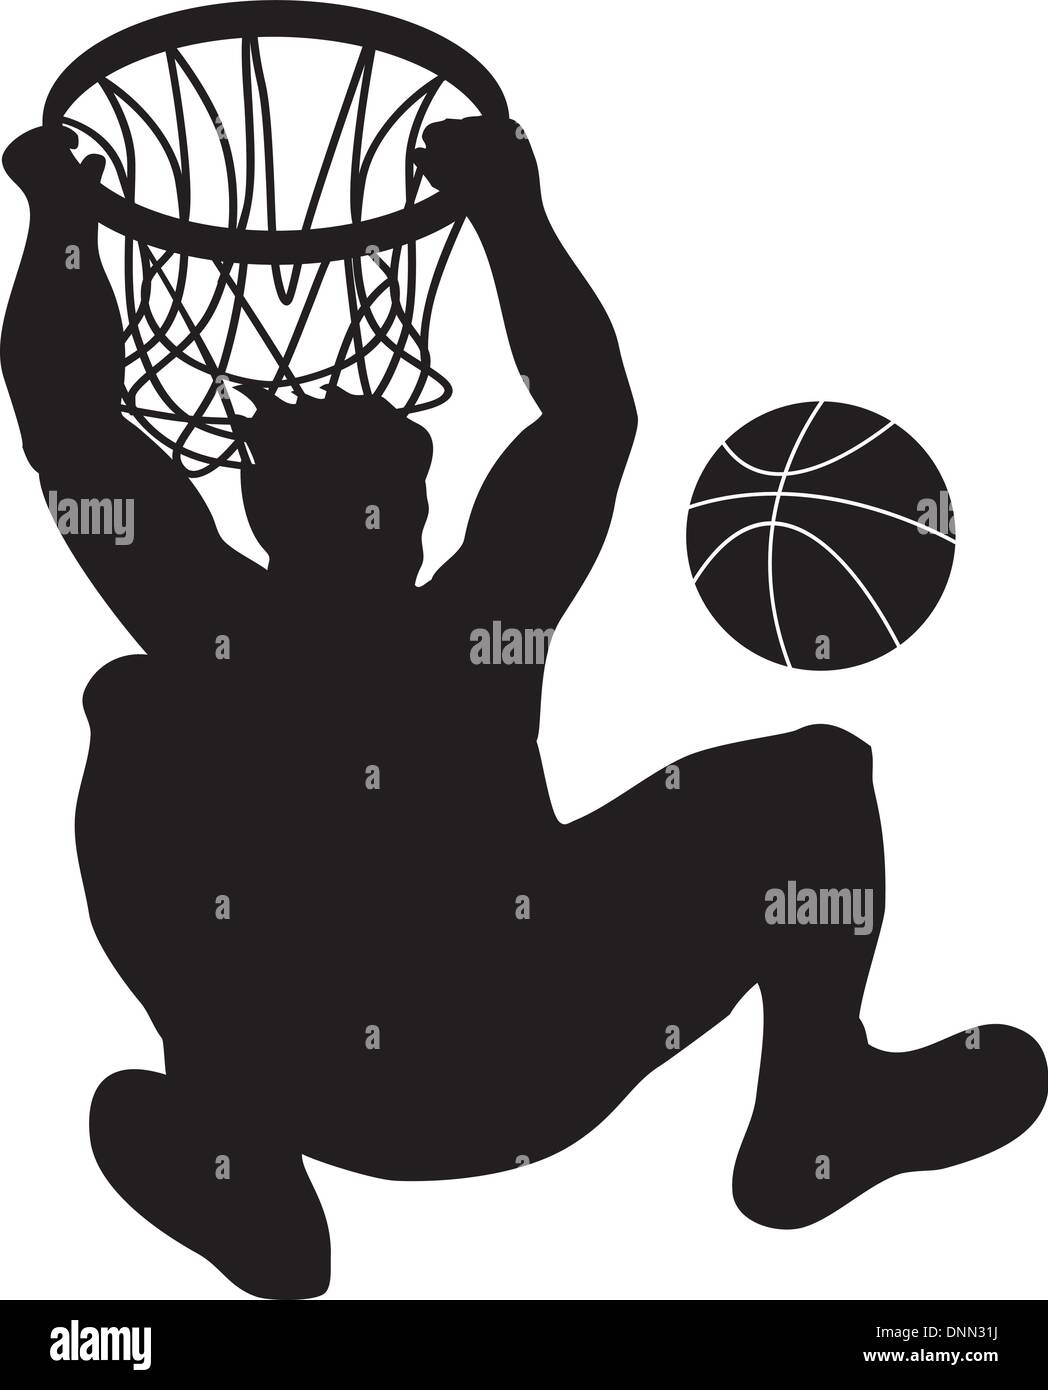 Illustration of a basketball player dunking ball on isolated white background. Stock Vector